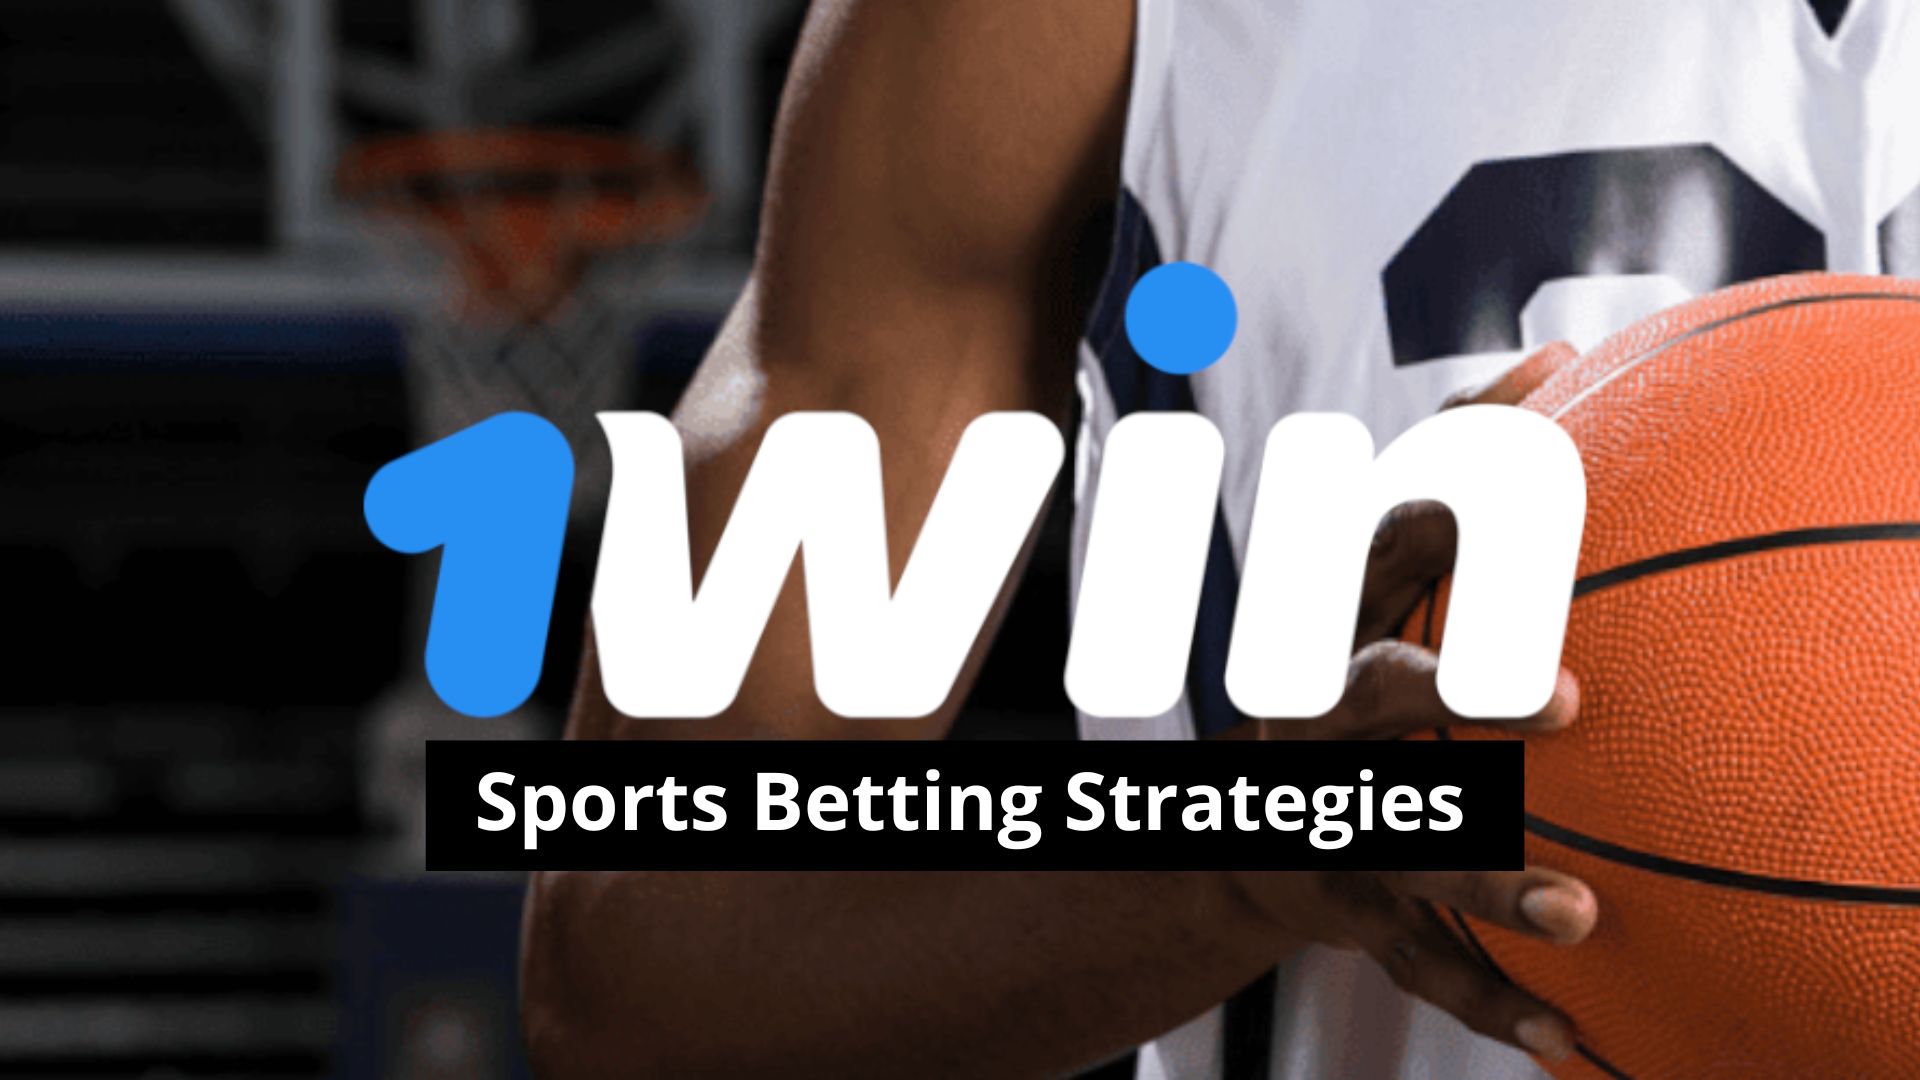 Sports Betting Strategies: Maximize Profits on Your Favorite Games